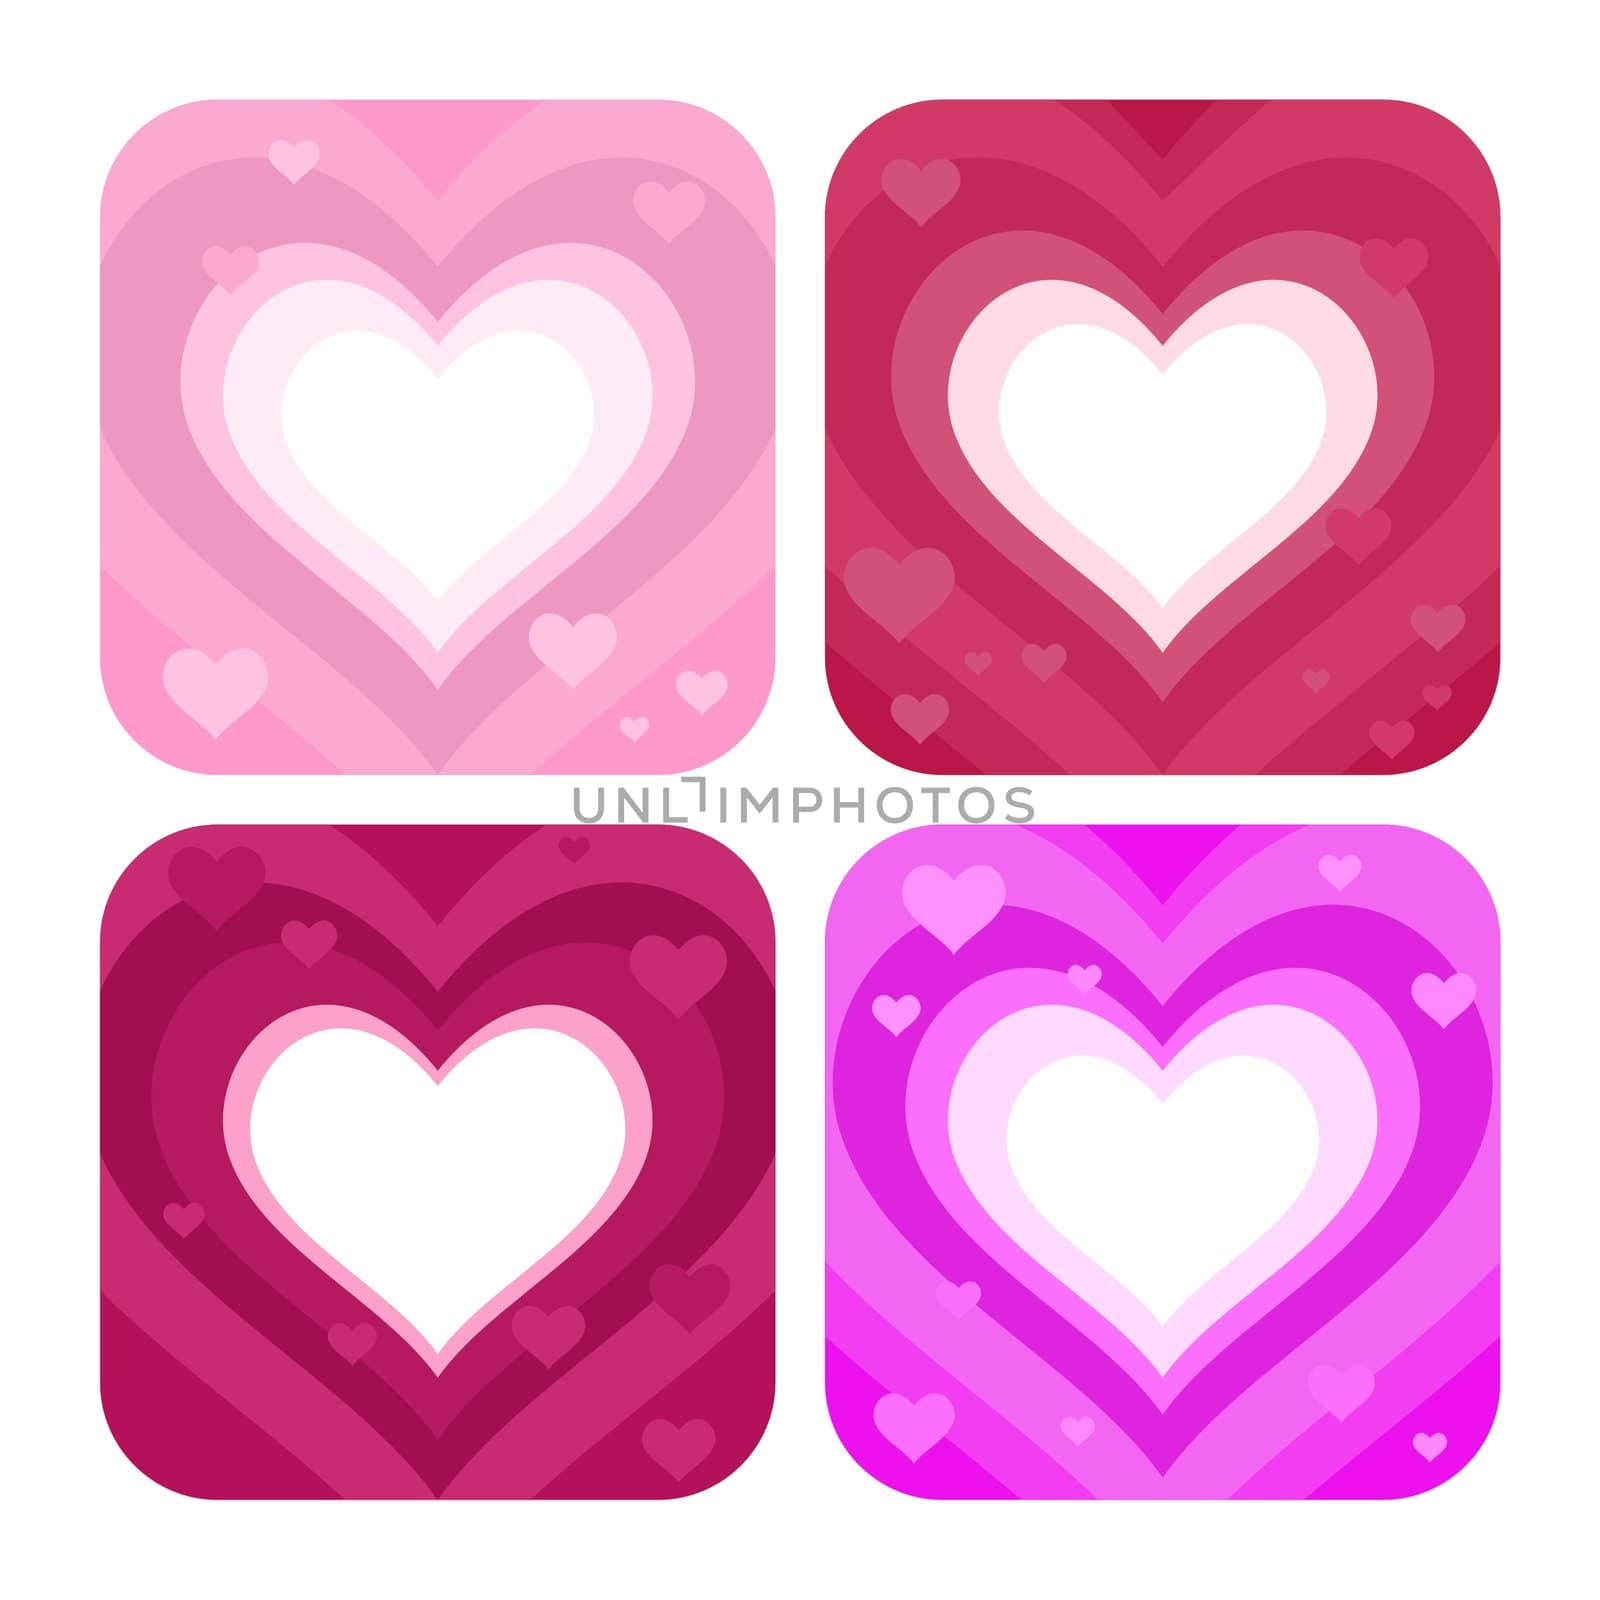 four hears in different colors - pink and purple